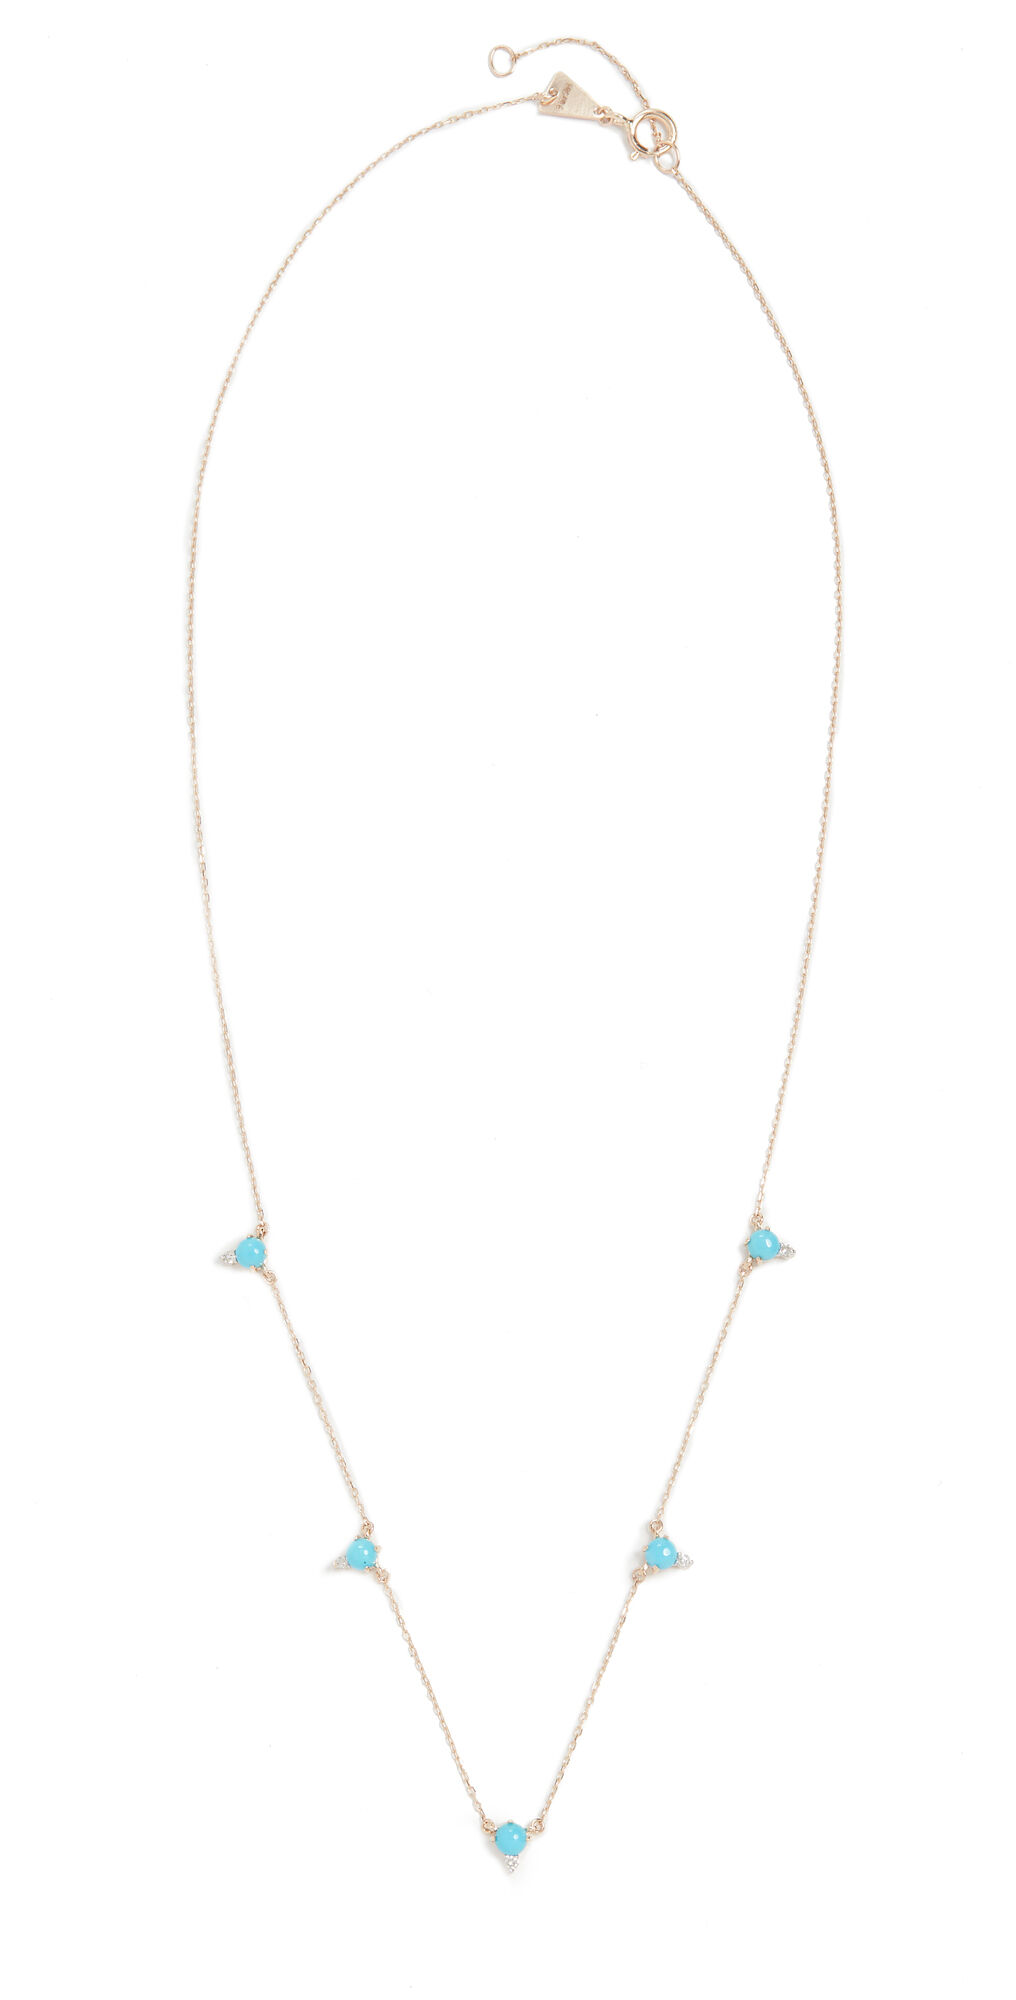 Adina Reyter 14k Turquoise + Round Diamond Chain Necklace Yellow Gold One Size  Yellow Gold  size:One Size